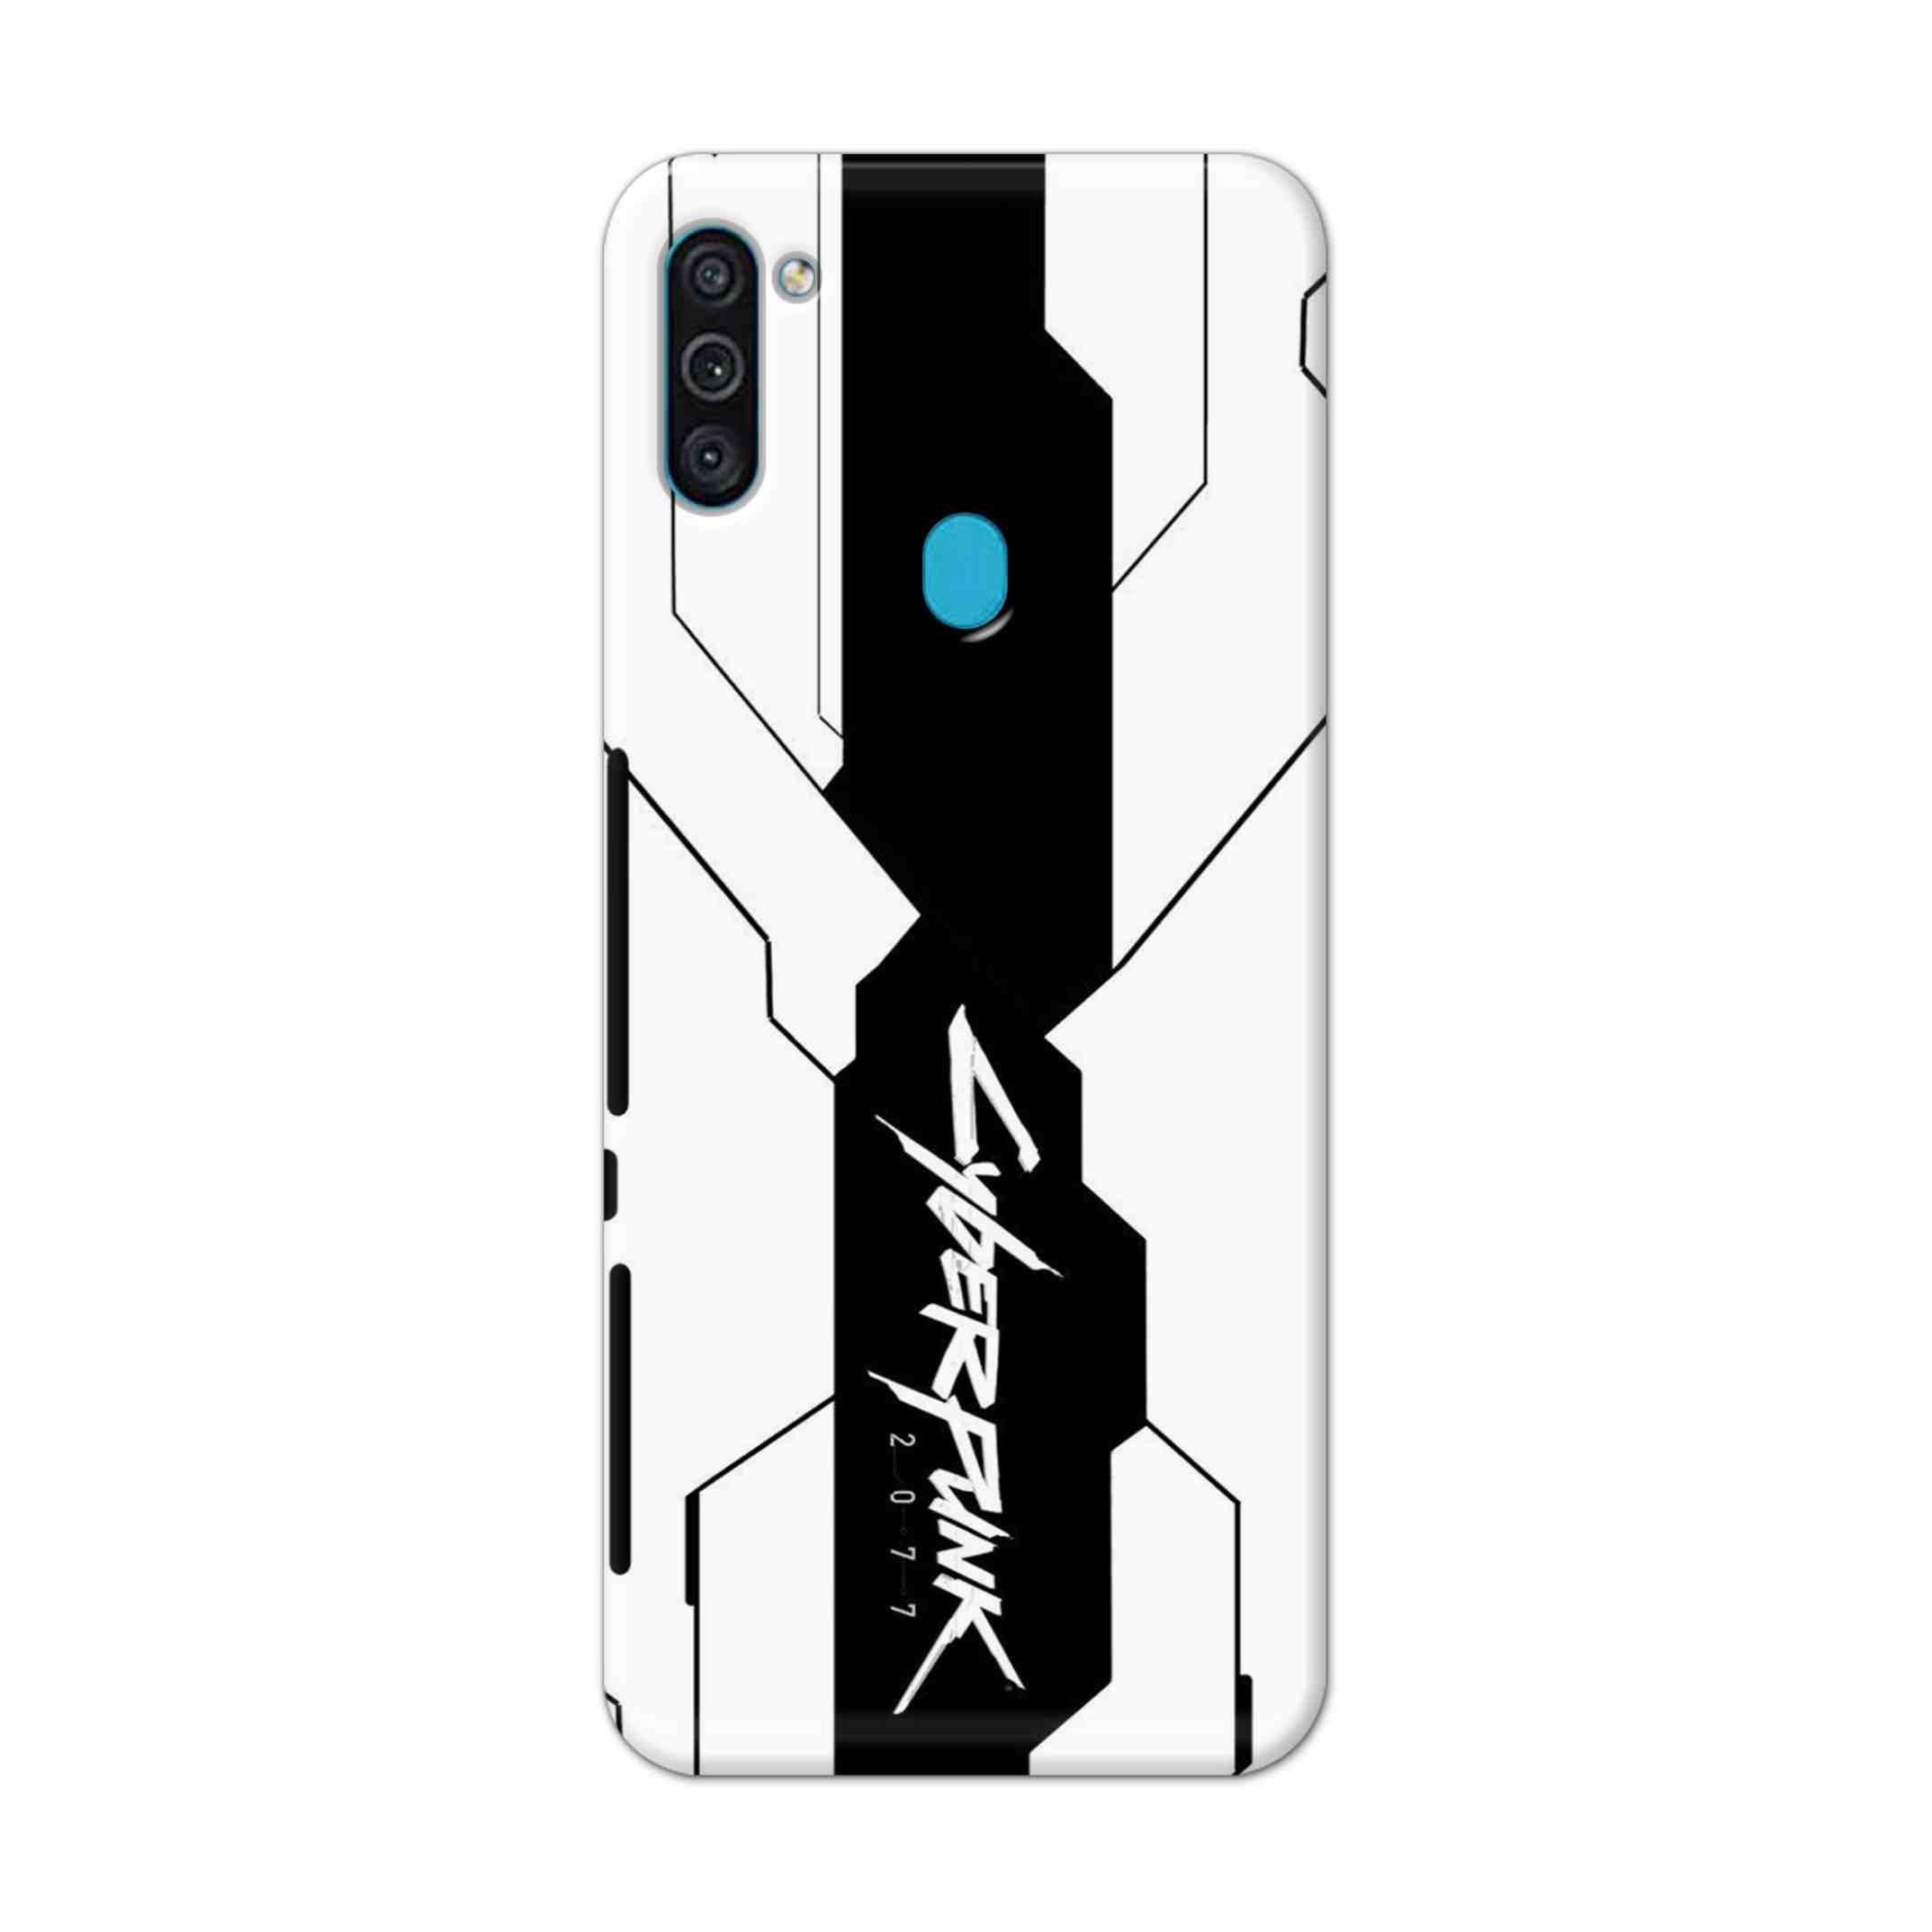 Buy Cyberpunk 2077 Hard Back Mobile Phone Case Cover For Samsung Galaxy M11 Online